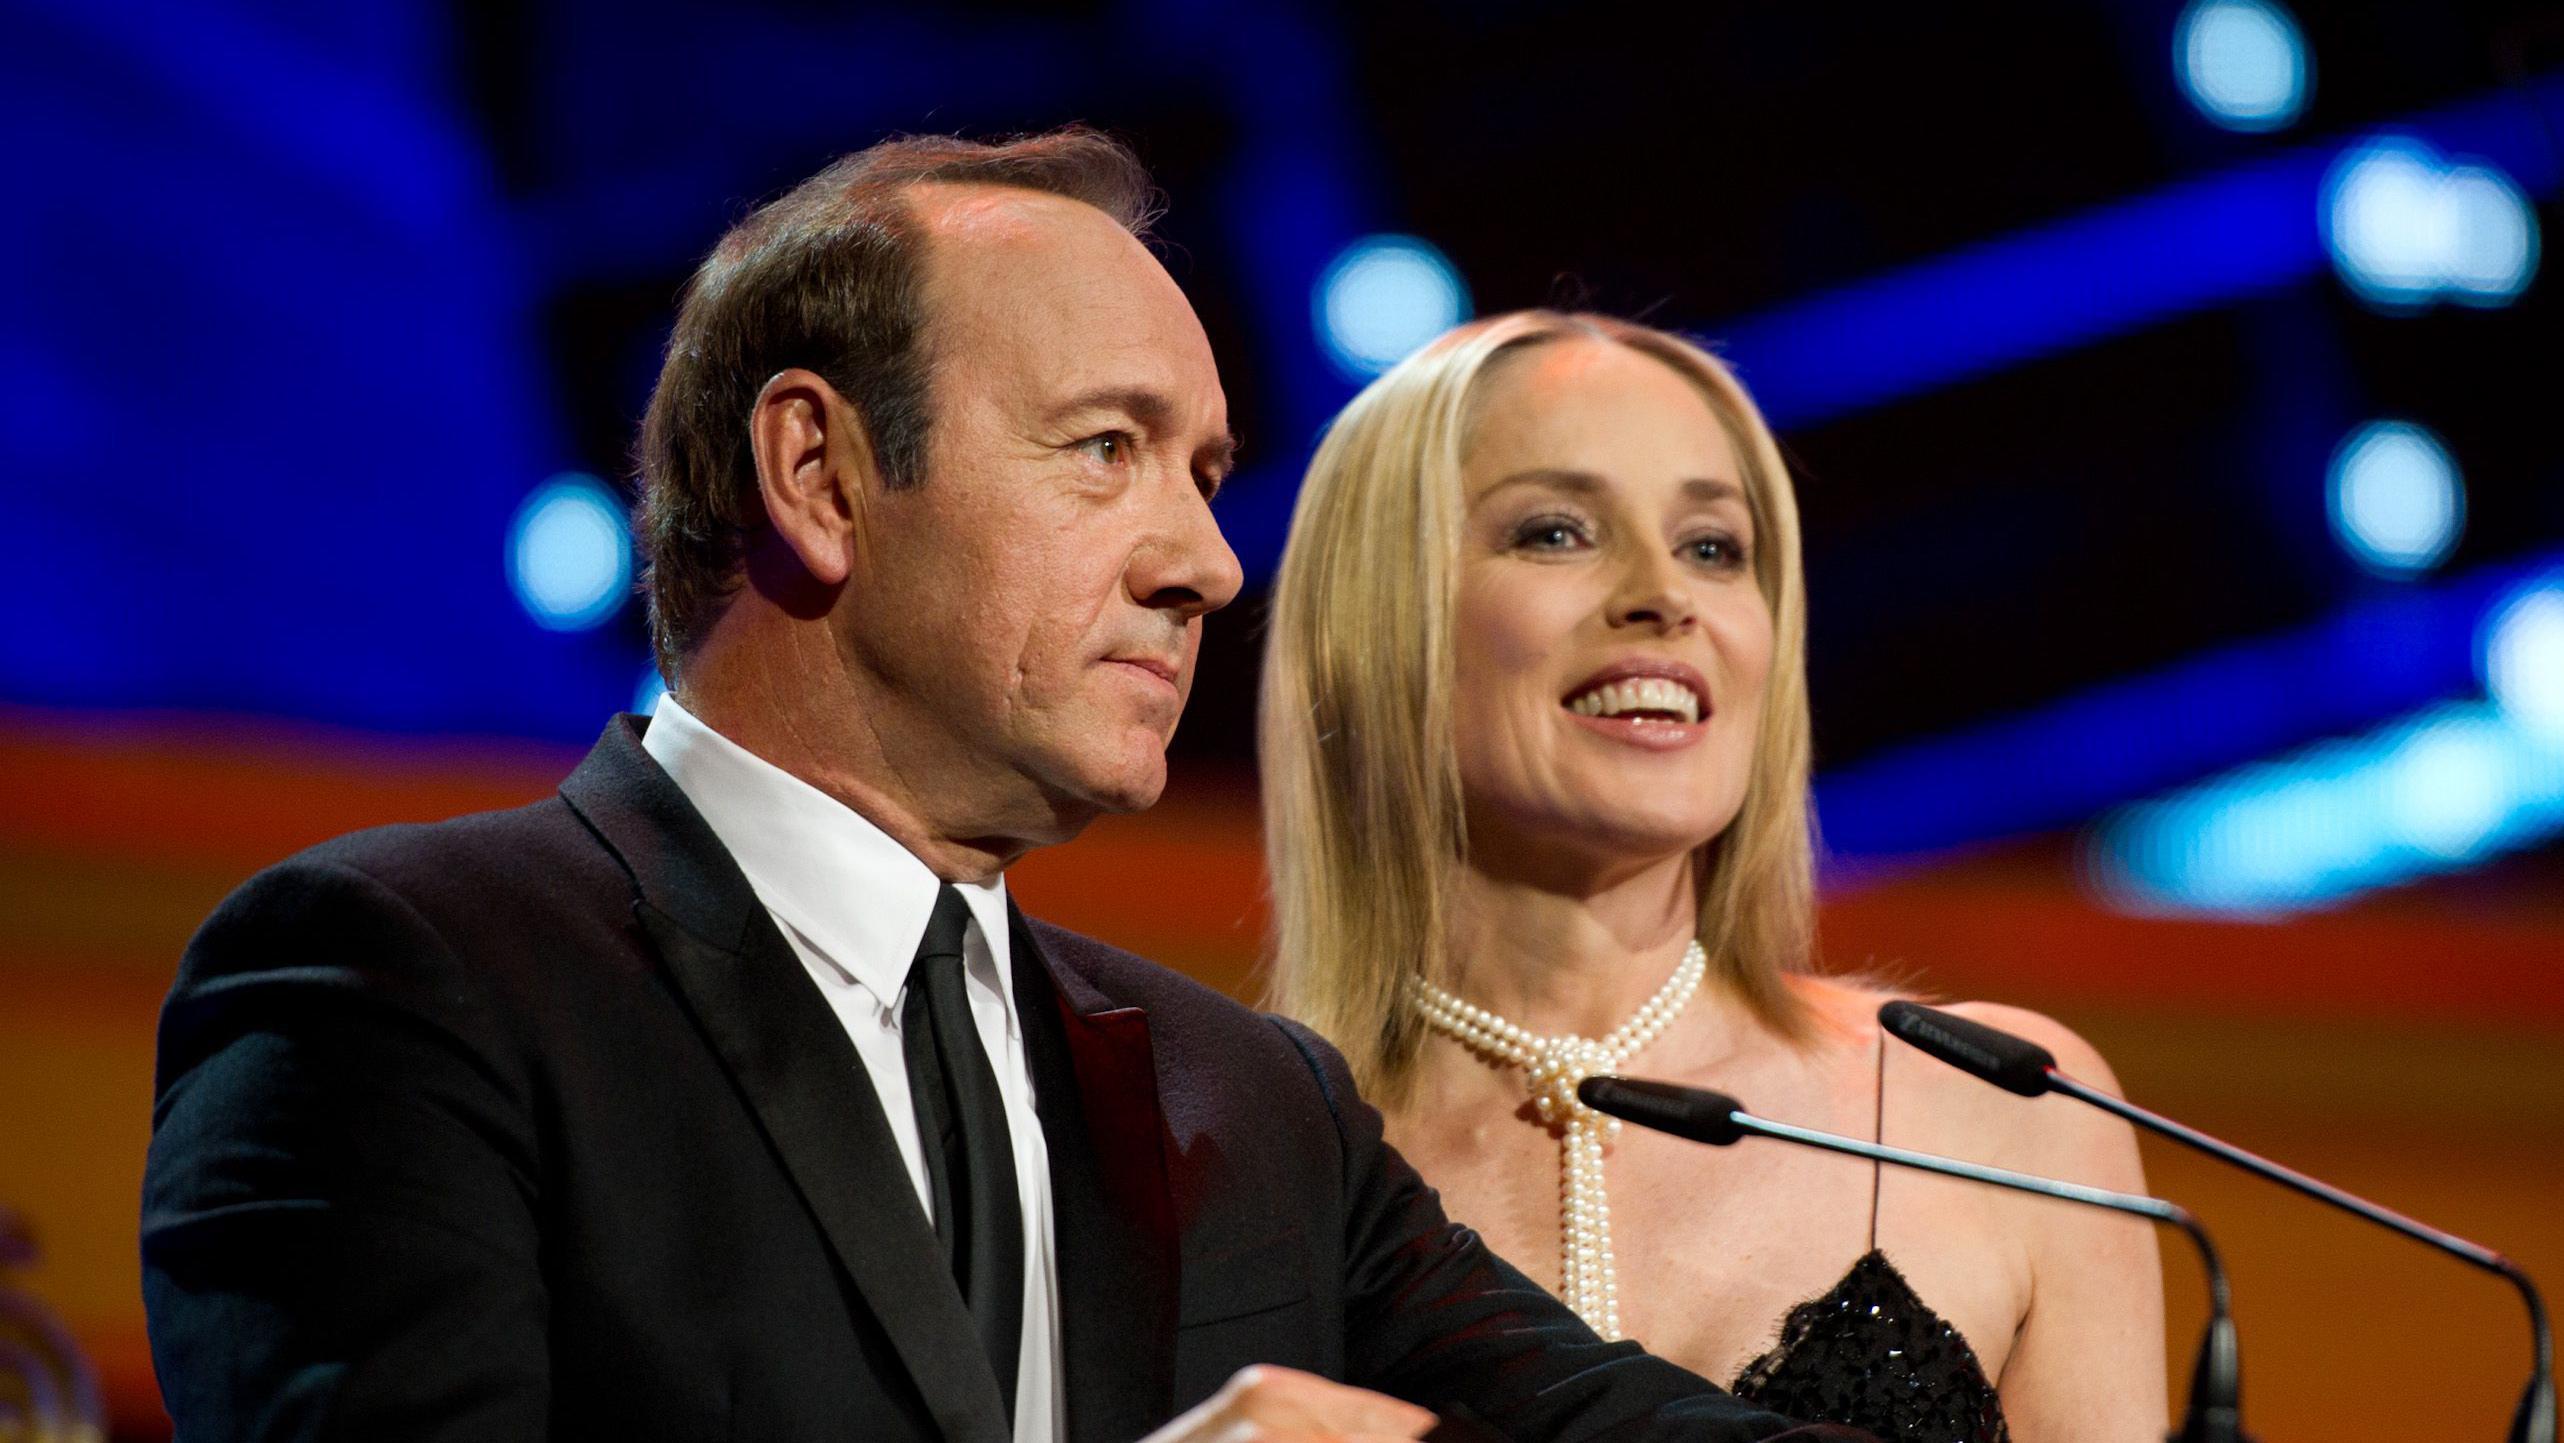 Kevin Spacey says he was too handsy’ in the past